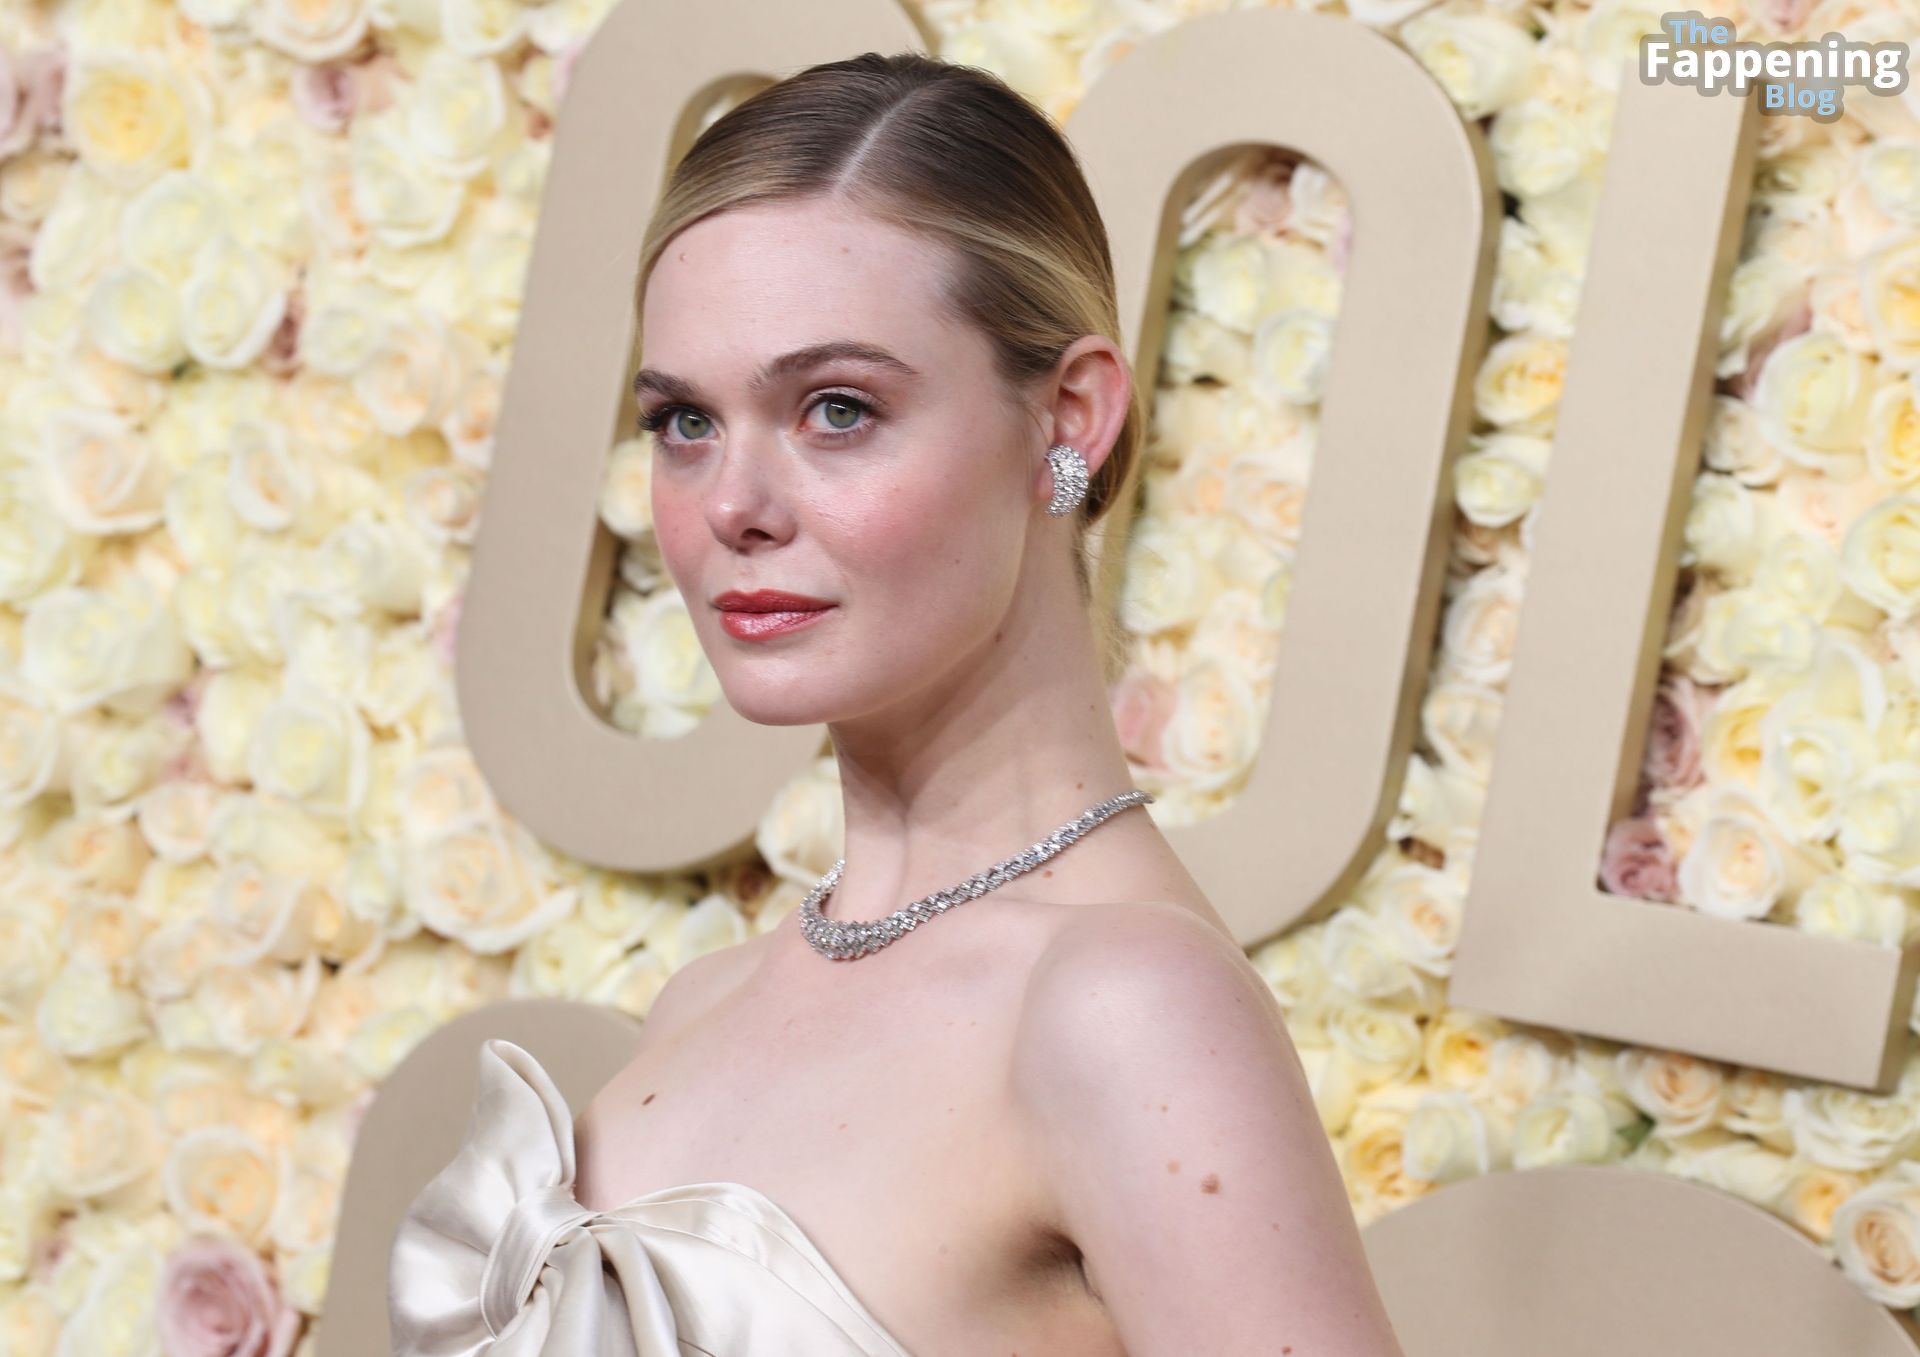 Elle-Fanning-Sexy-78-The-Fappening-Blog.jpg